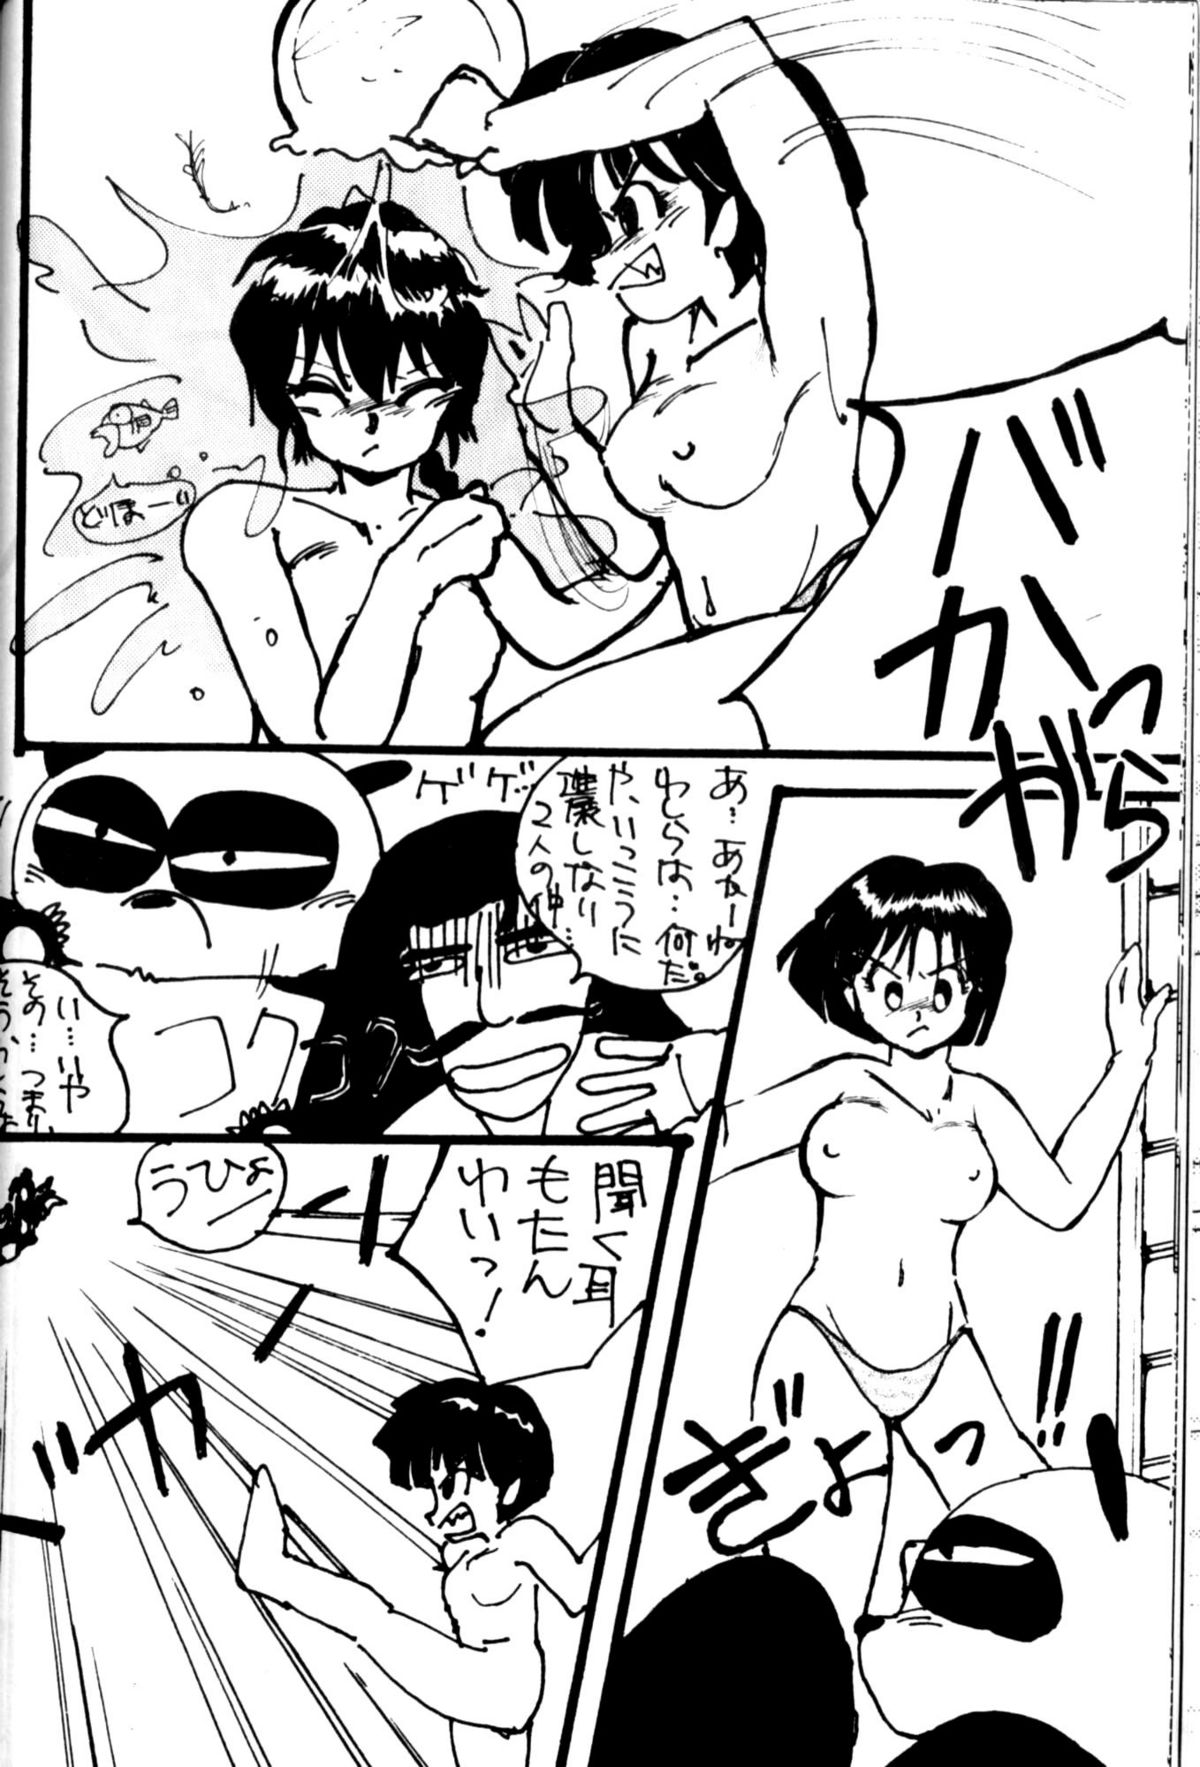 T You (Ranma 1/2) page 21 full